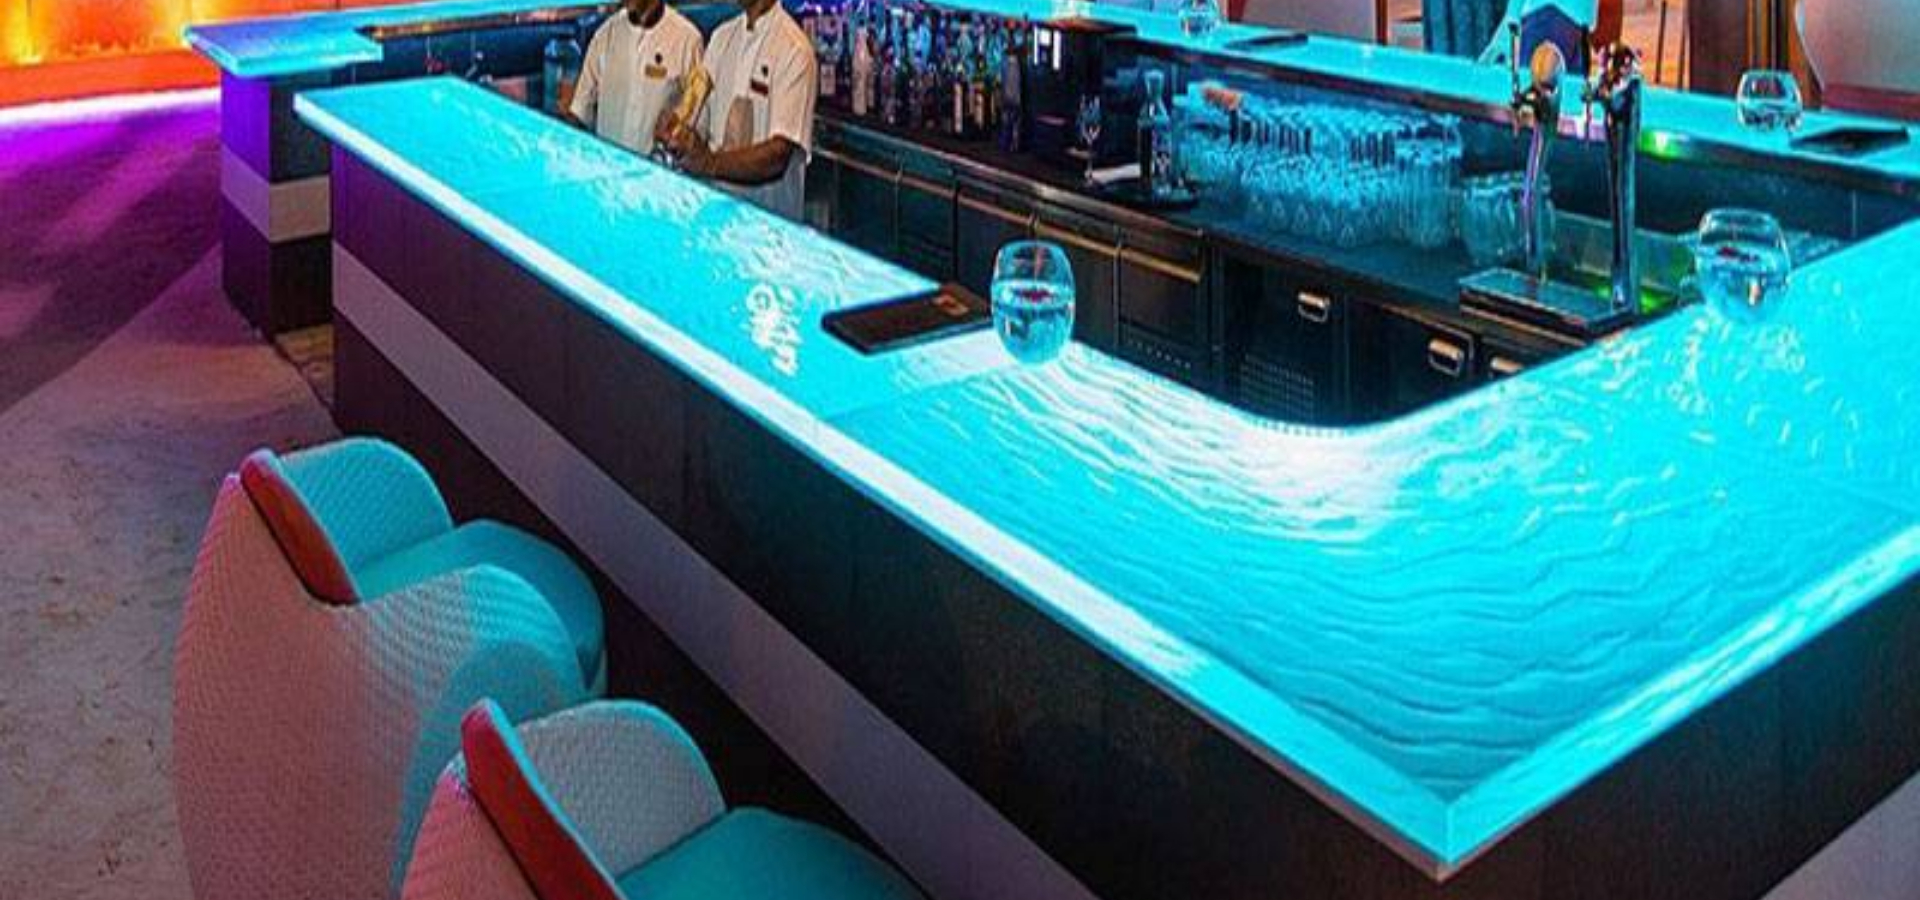 Restaurants and bars glass table tops with LED